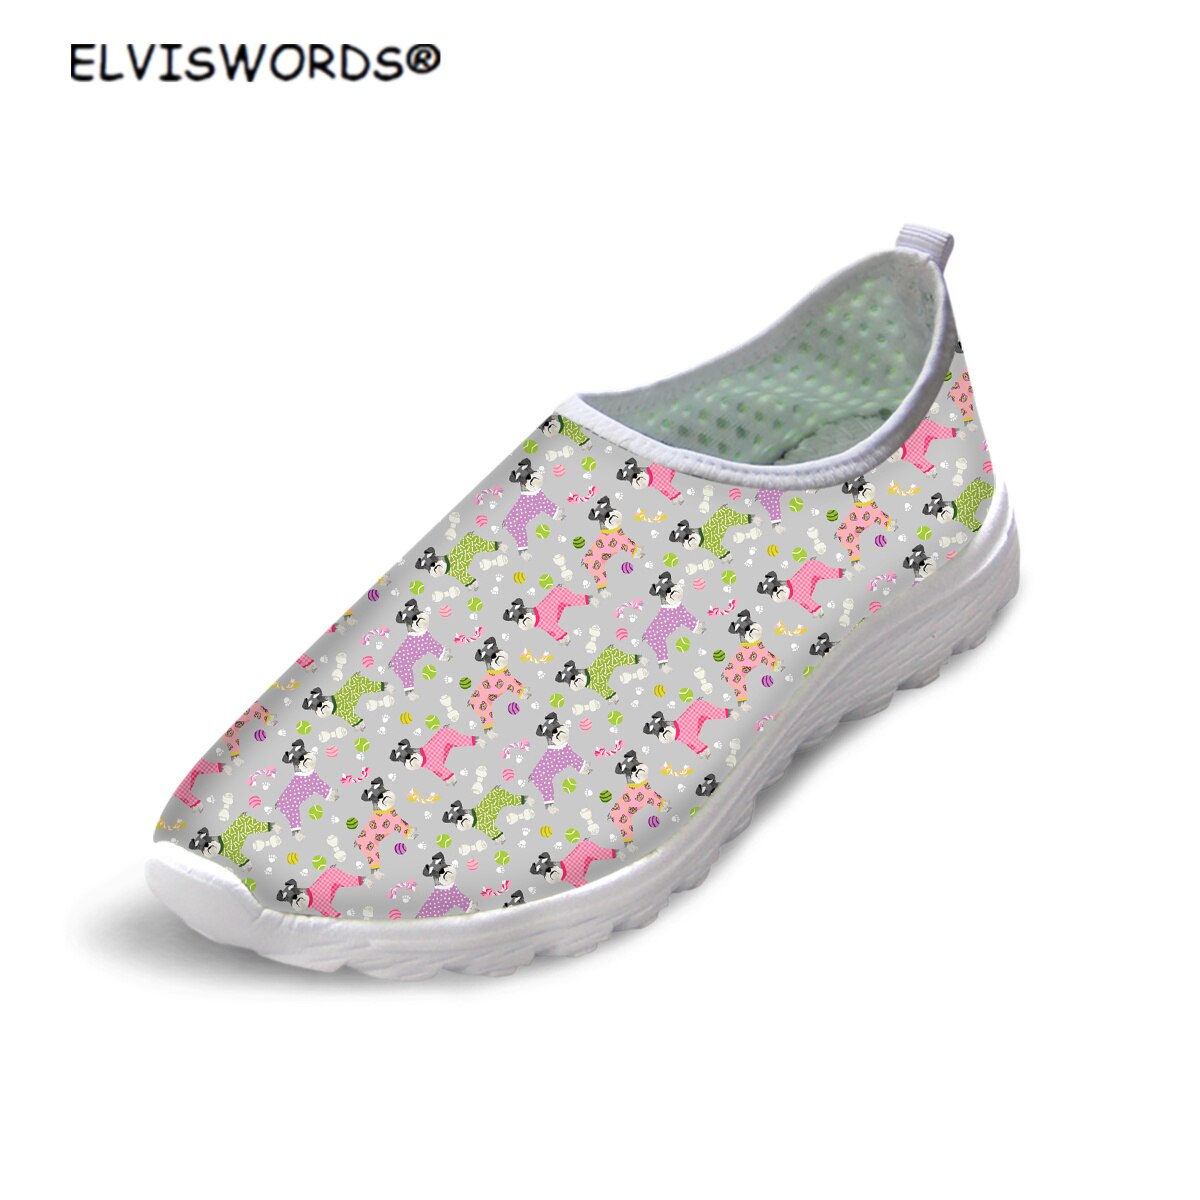 ELVISWORDS Lovely Dog Design Casual Non-slip Sneakers for Women Stylish Ladies Breathable Walking Shoes Slip on Woman's Loafers